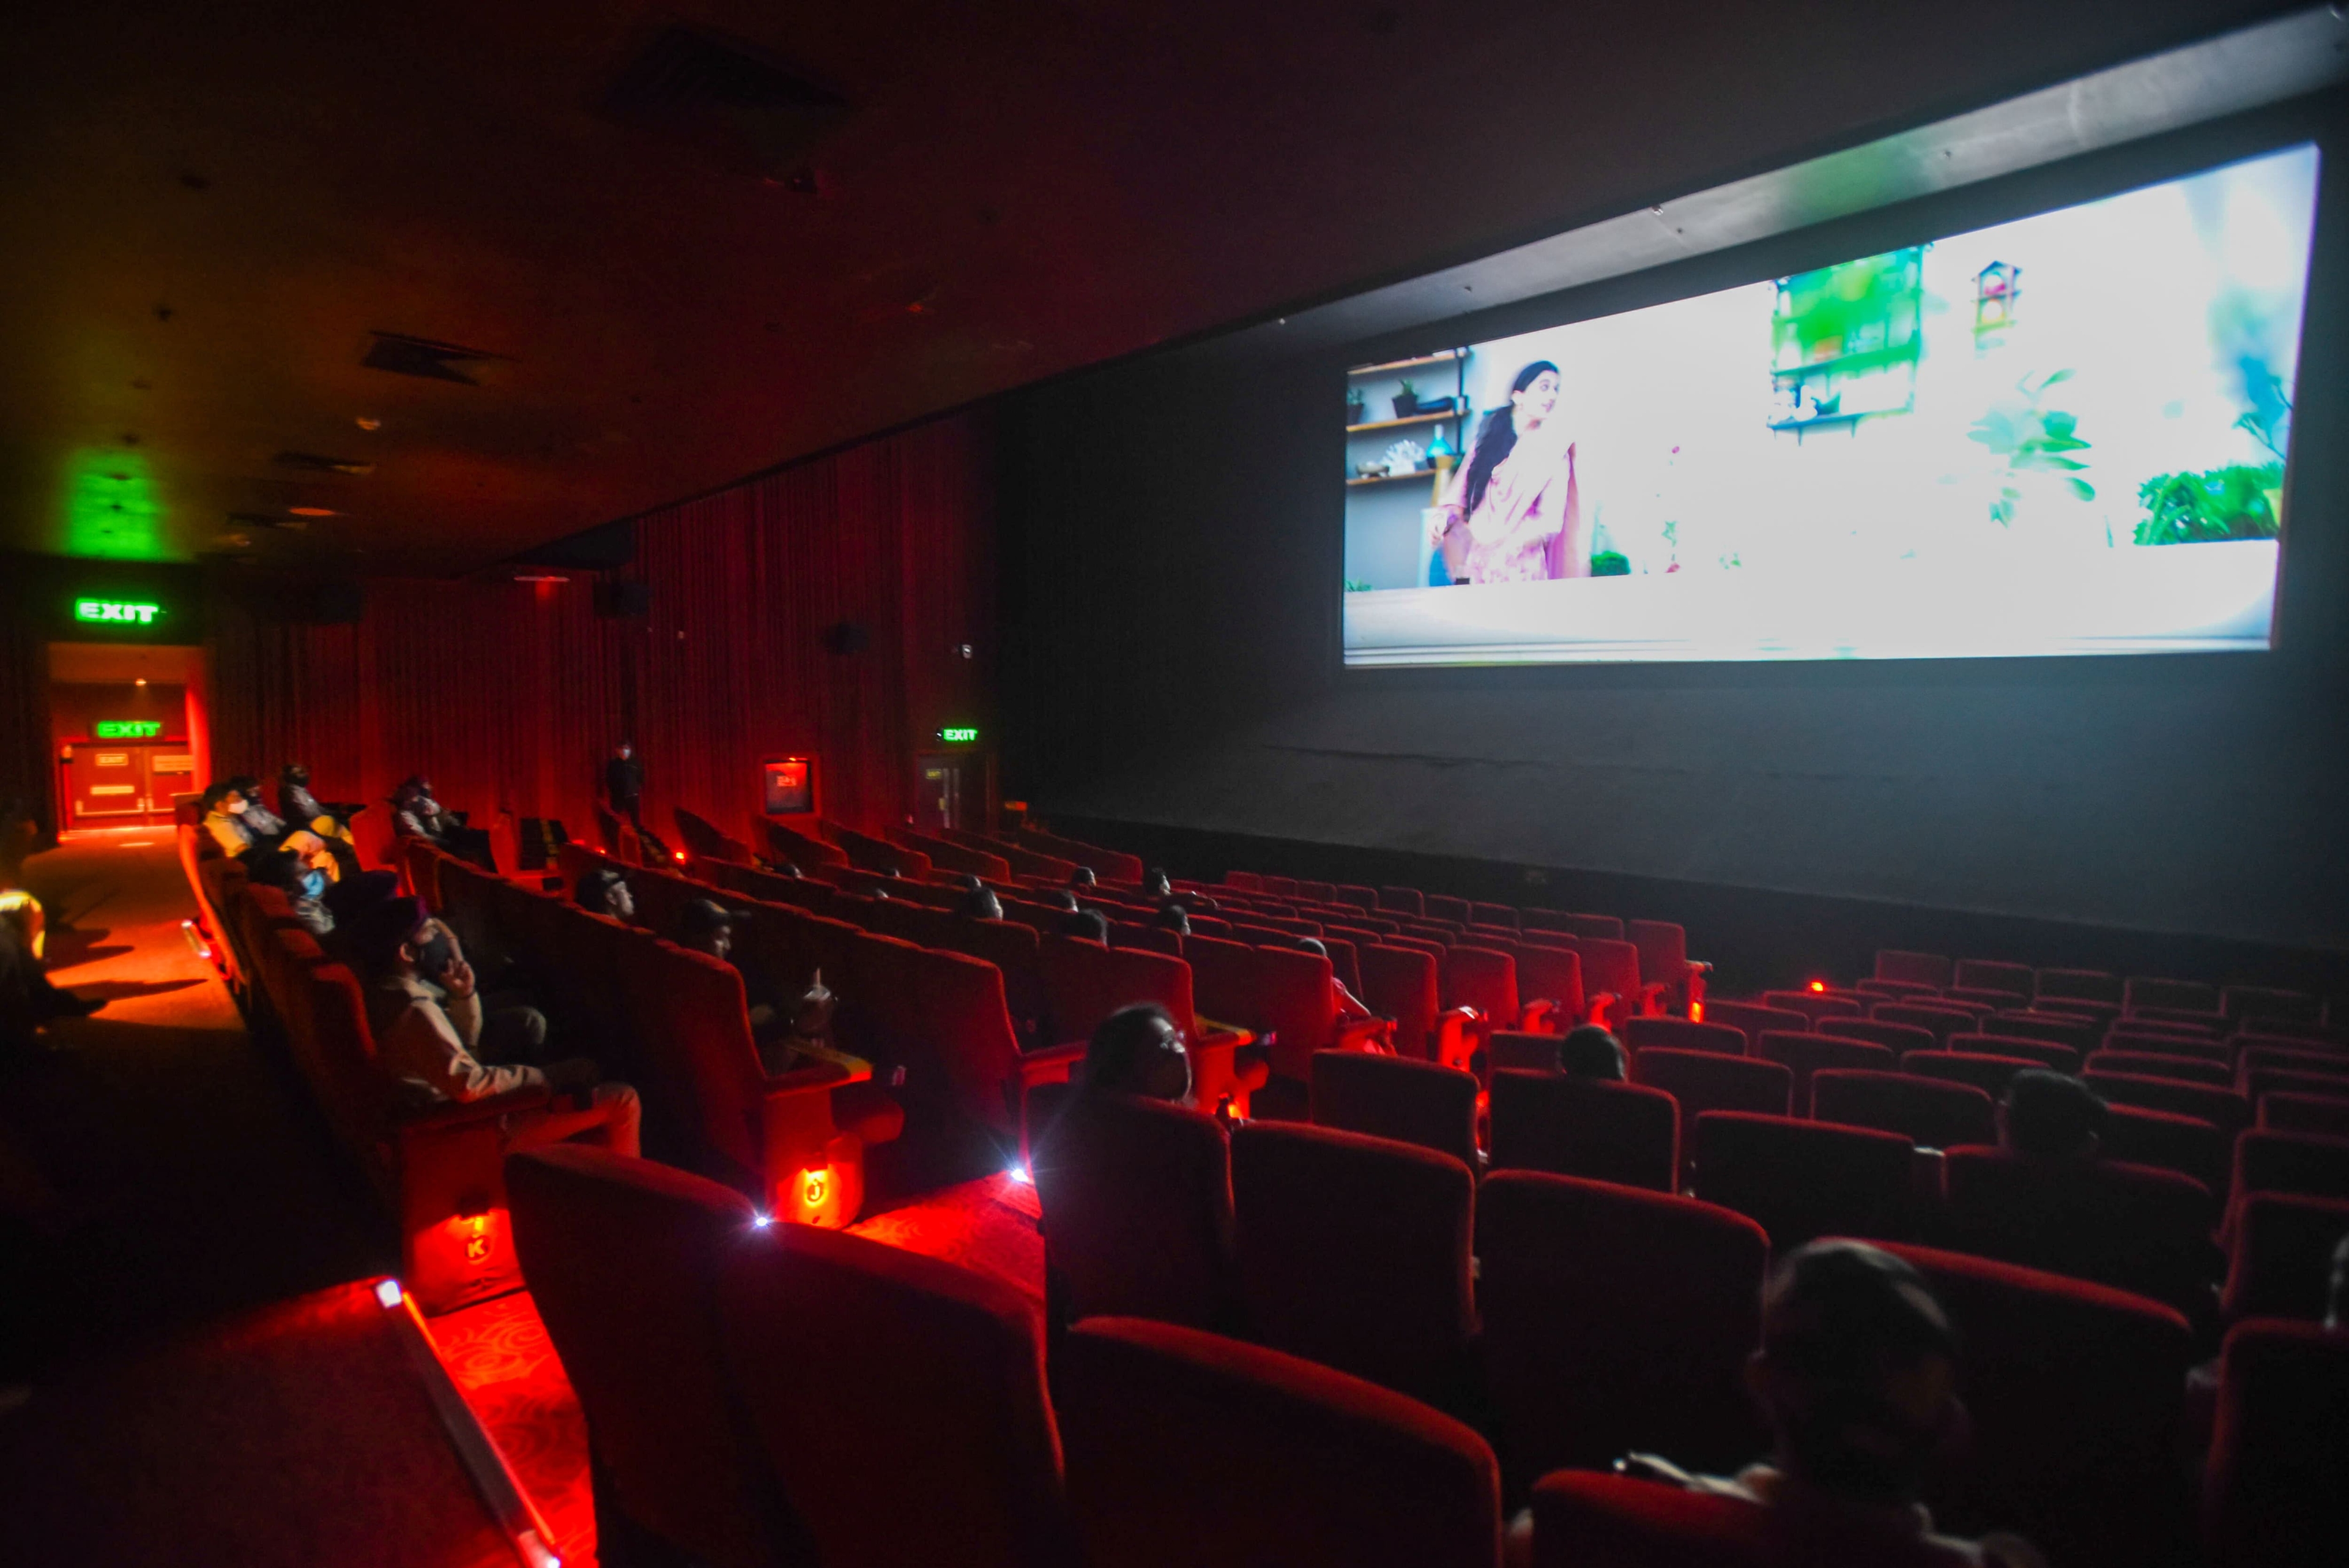 A special screening of a movie at a PVR movie theatre (Photo: Amal KS/HT PHOTO)